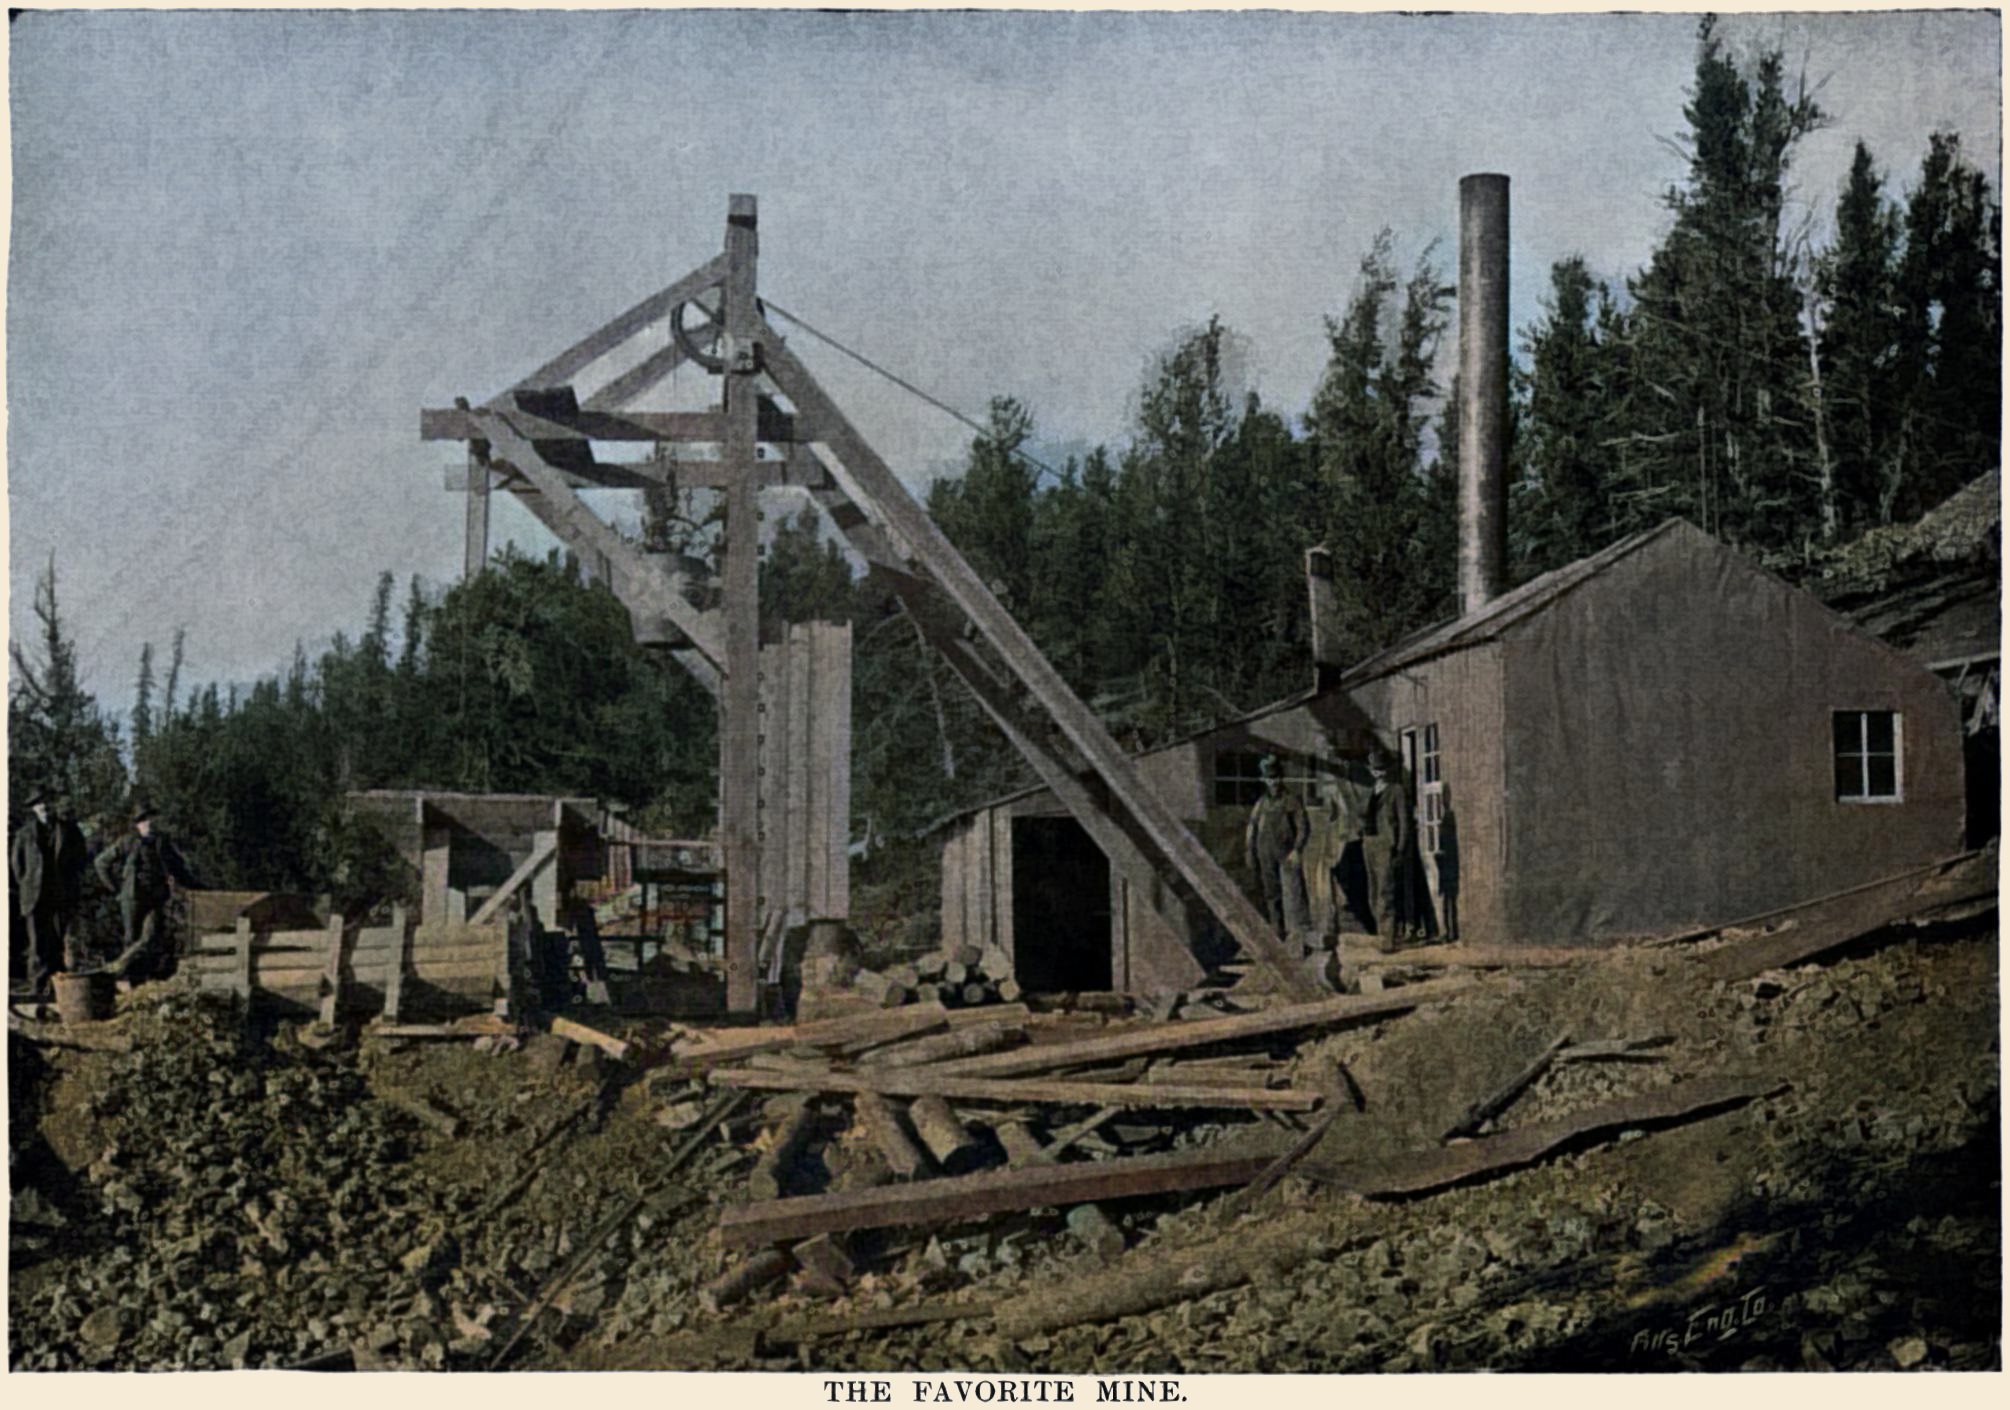 This is the first ever image I have seen of the Favorite Mine structures, and I saw plans for a model with drawings many years ago but never any picture, so yes, I was happy now!
   Being in a book from 1896 the quality is not that great, but I think it came out as good as I can expect it and we get to see how this mine has carved its spot in the forest here on Bull Hill's western slope. Image shows smaller Headframe and a house holding the hoist, boiler for that hoist based on the larger smokestack, but as that structure also has a second smokestack they had some other form of need to let smoke out, but what it was, I do not know.
   I did procure the colored version of this image. Source was grayish, or in common speech black & white. Used an online service and tweaked and worked with image to get what looks best to my eyes at the moment. 